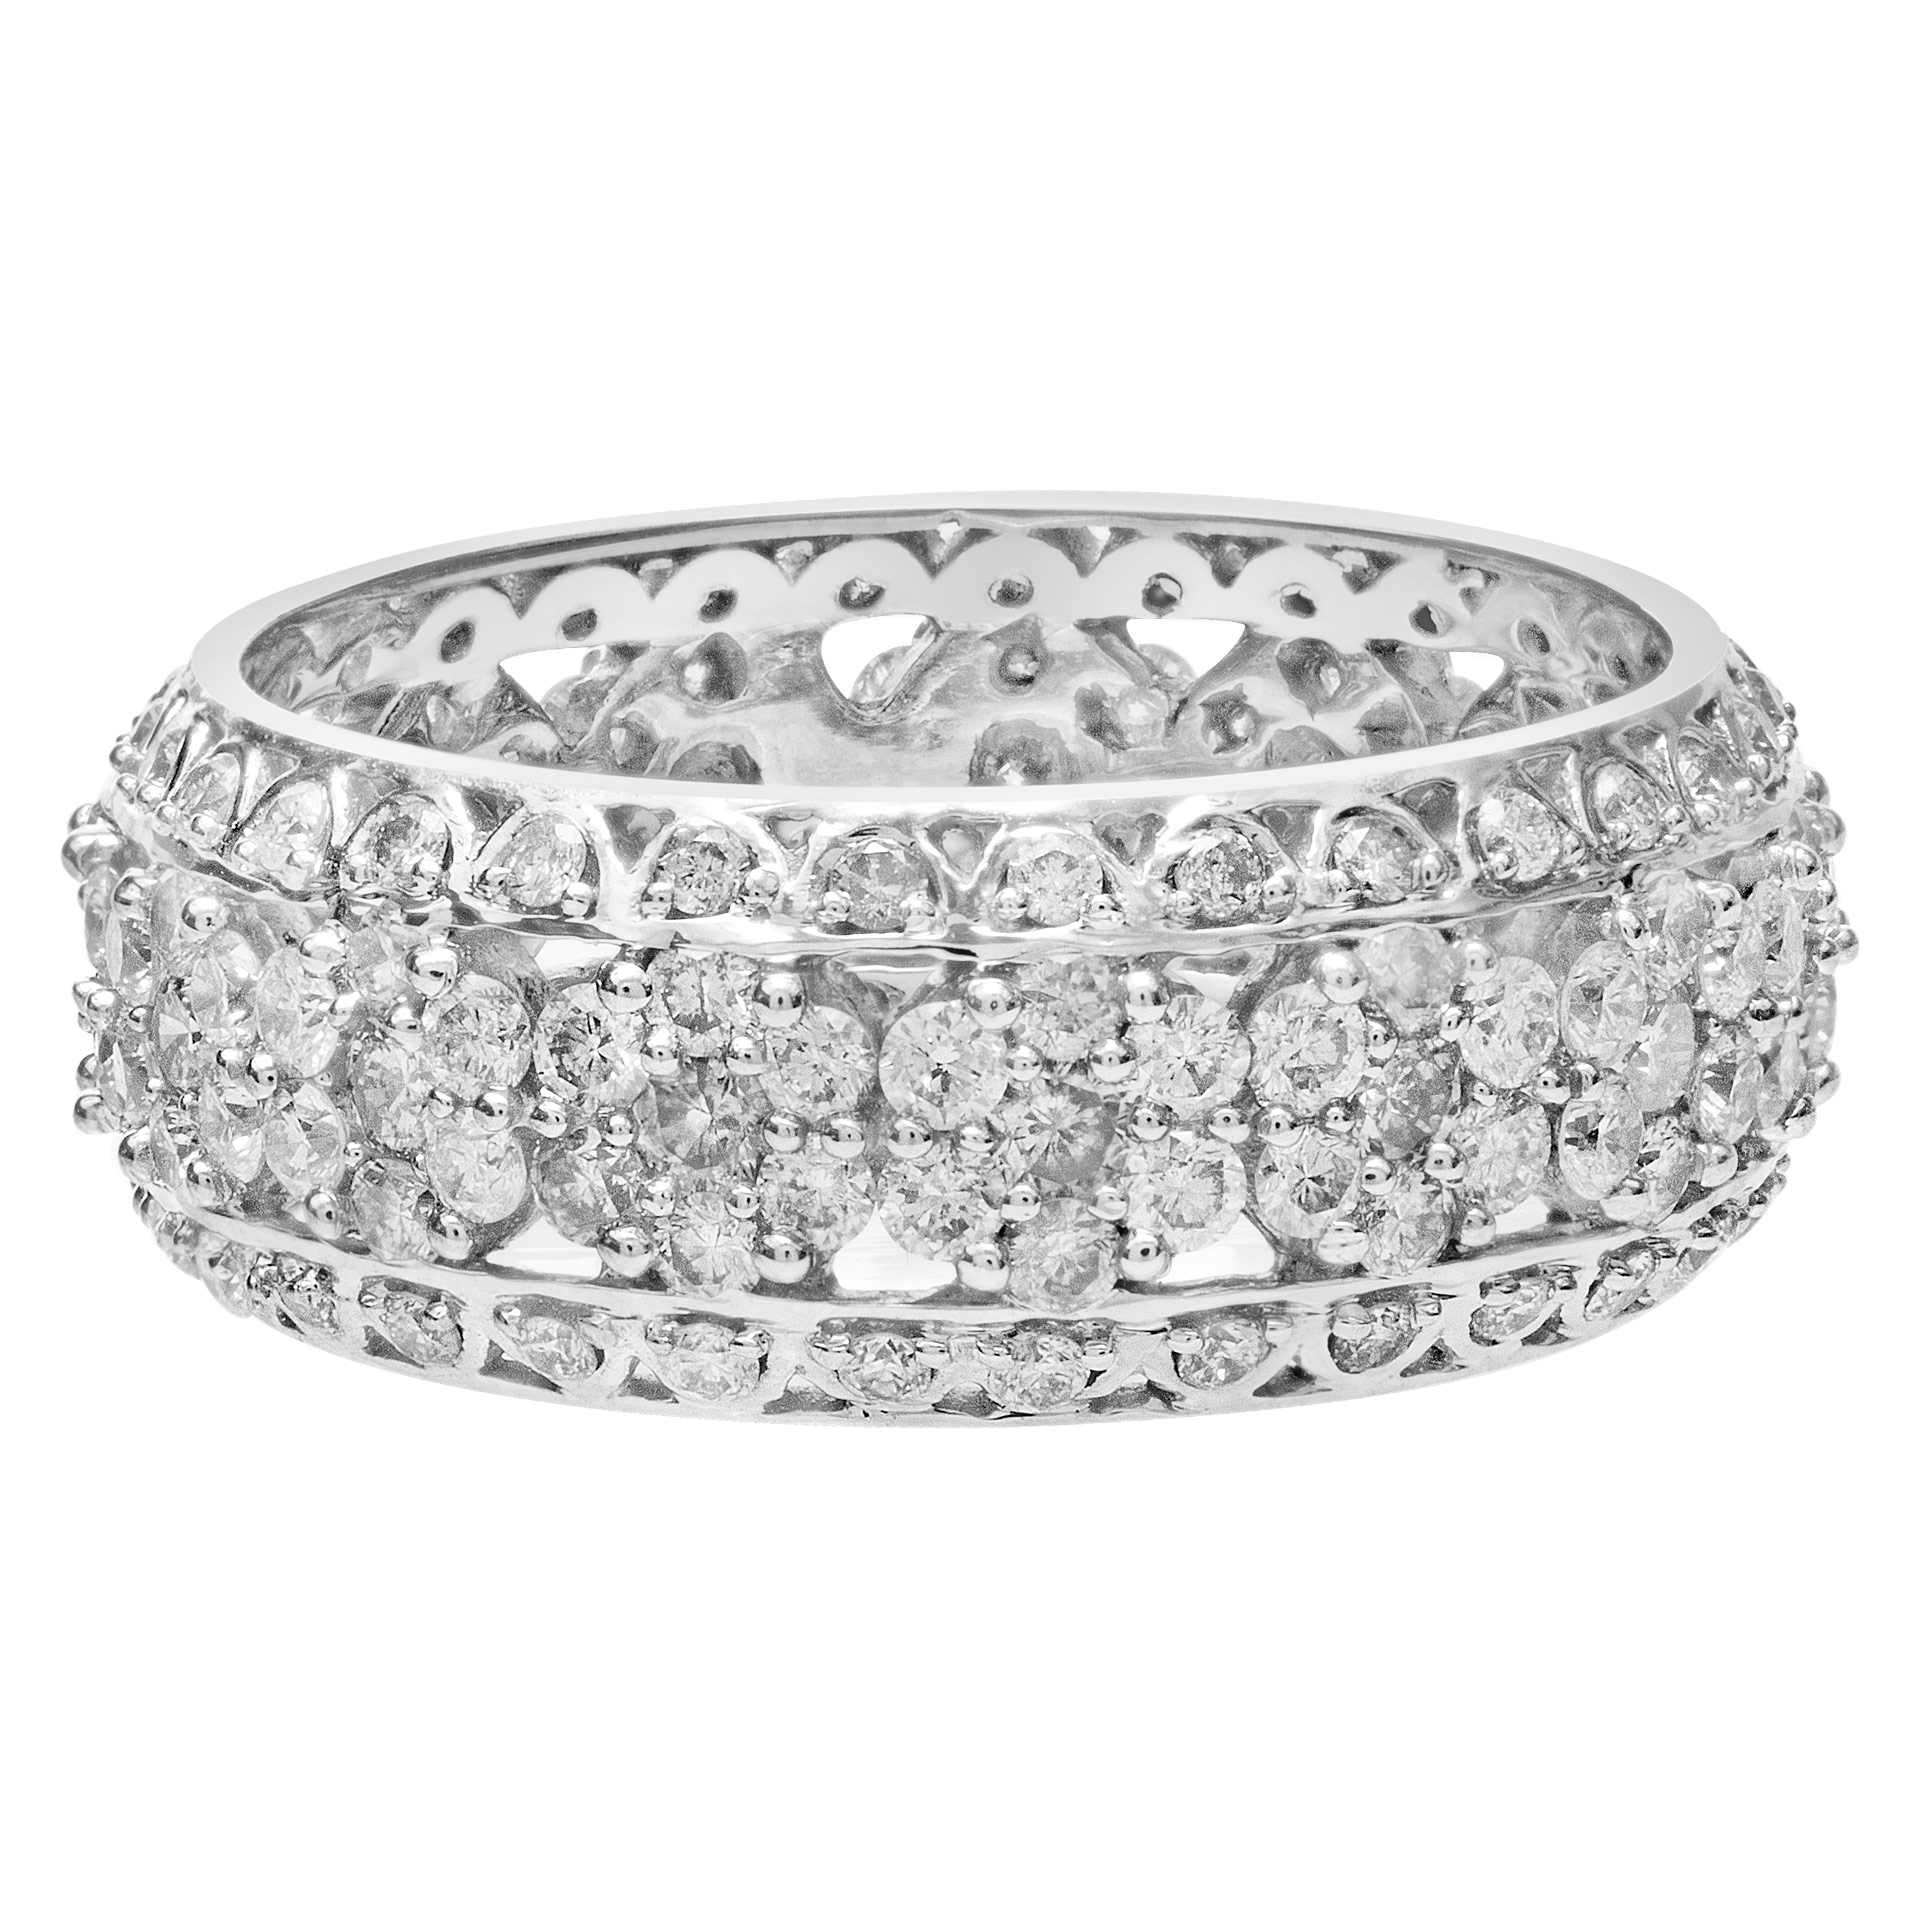 Diamond Eternity Band and Ring Charming Floral. 3.00 carats in diamonds. Size 9